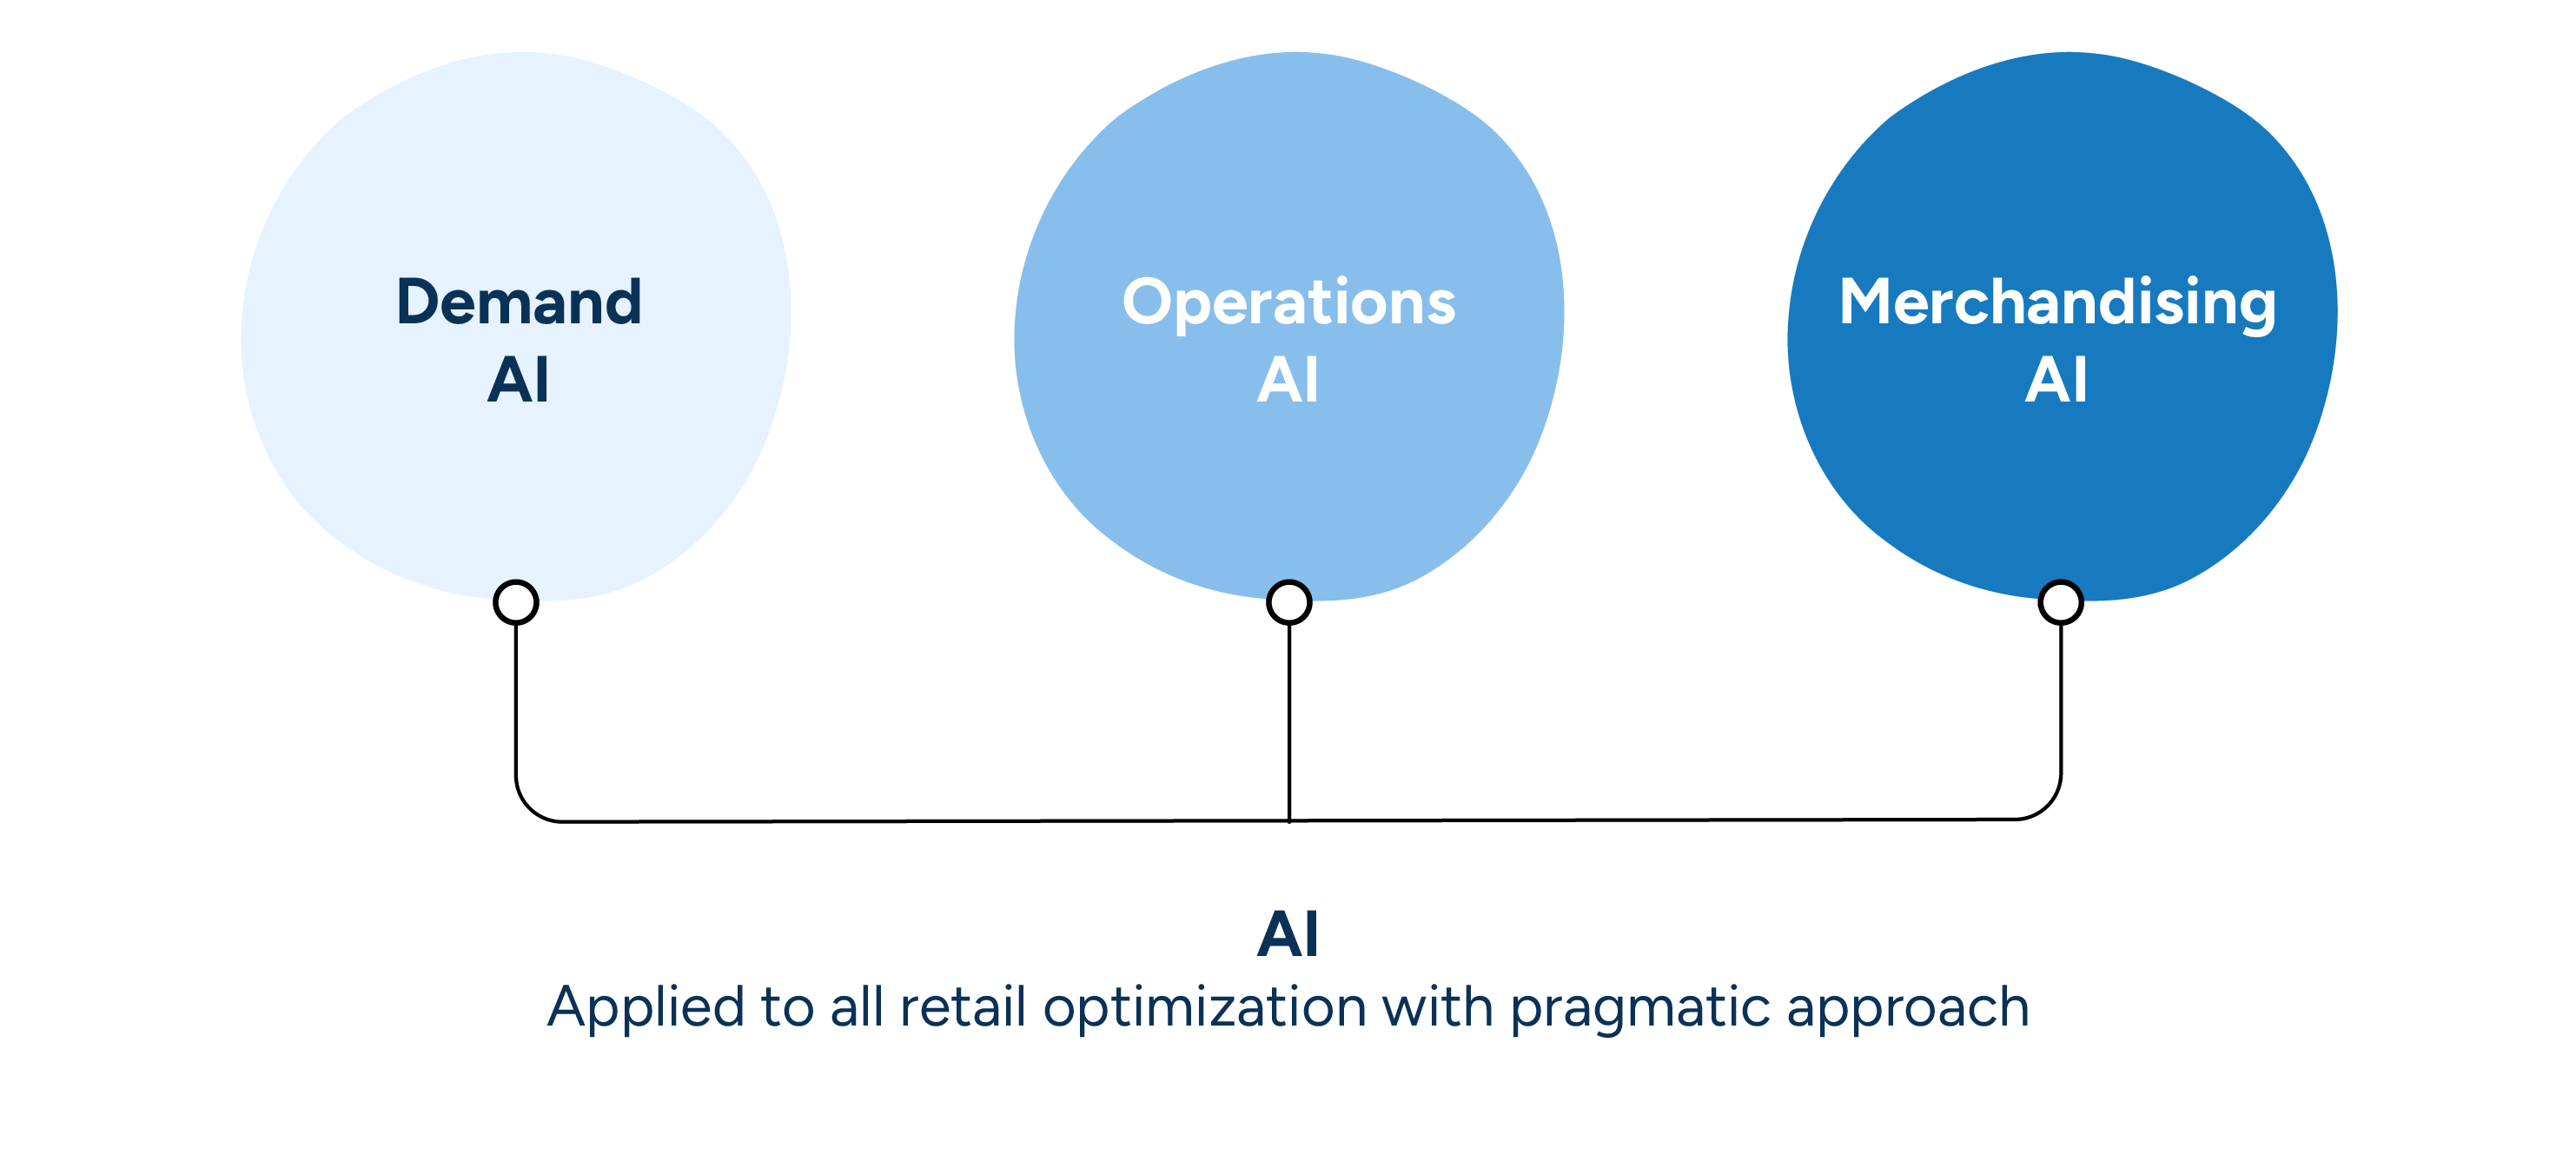 An illustration showing the relationship between pragmatic AI and retail demand, operations, and merchandising.